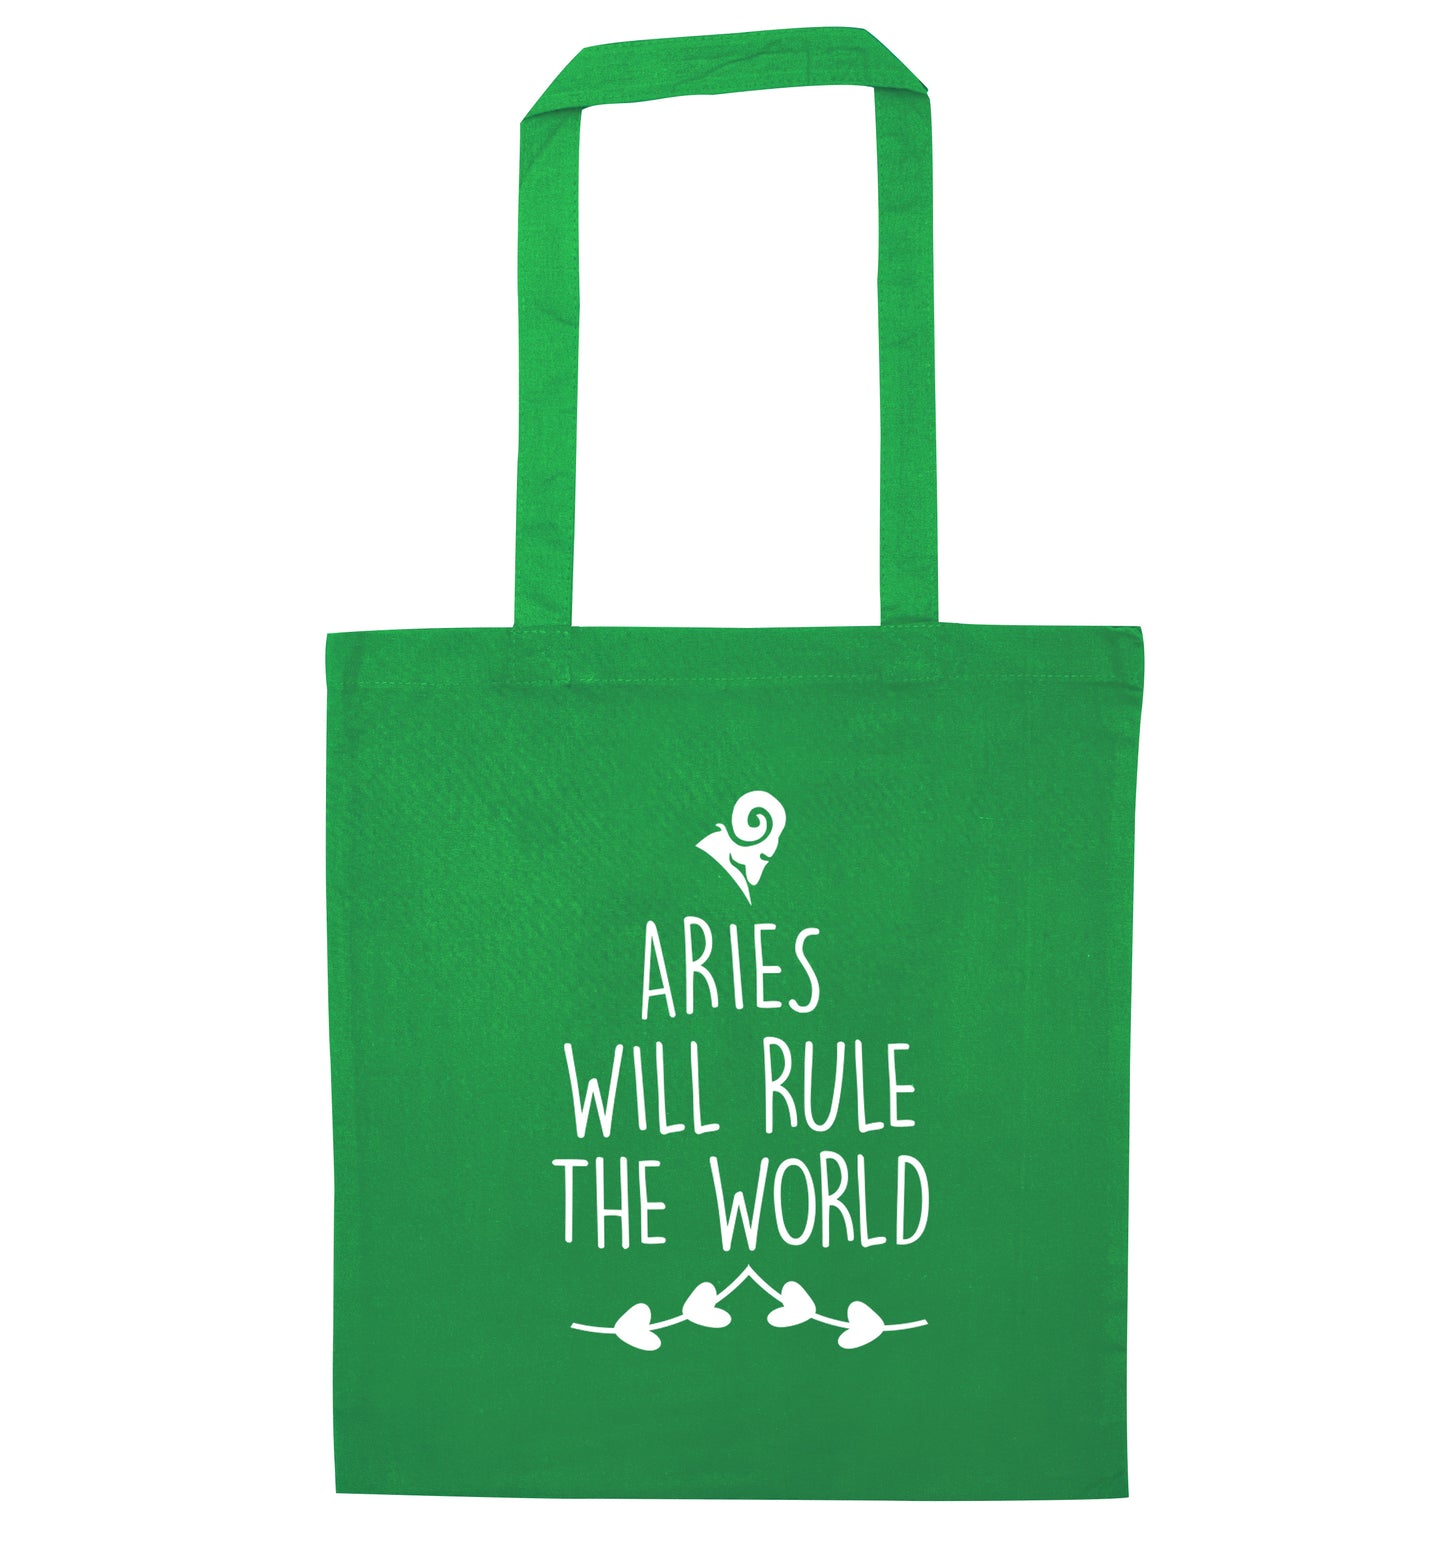 Aries will rule the world green tote bag